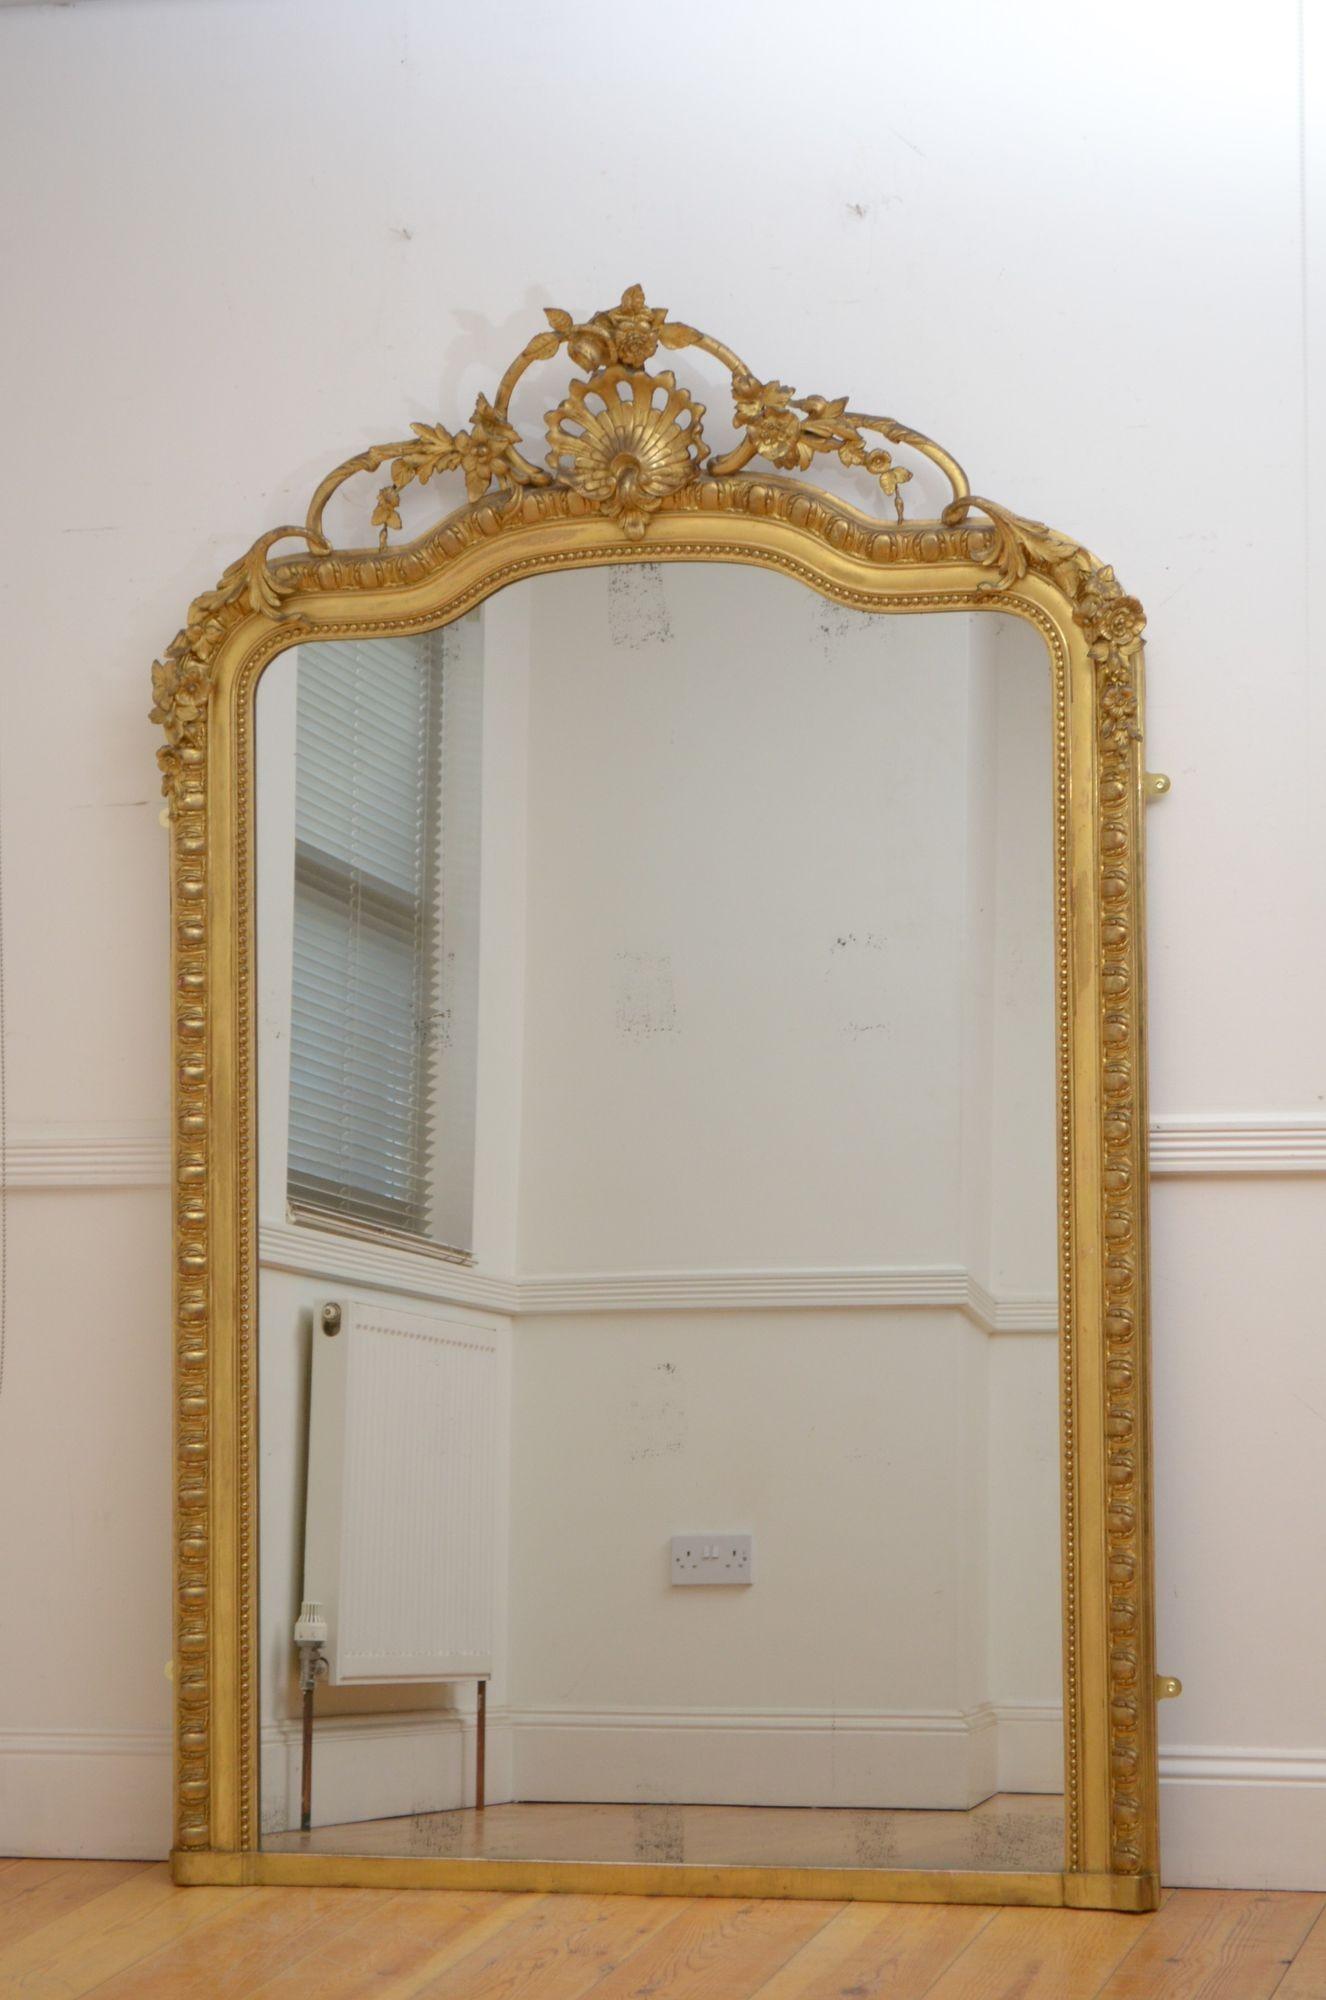 Sn5476 A superb 19th century French gilded wall mirror, having original glass with some foxing in beaded and egg and dart carved giltwood frame with foliage centre crest flanked by floral scrolls and swags. This antique mirror retains its original